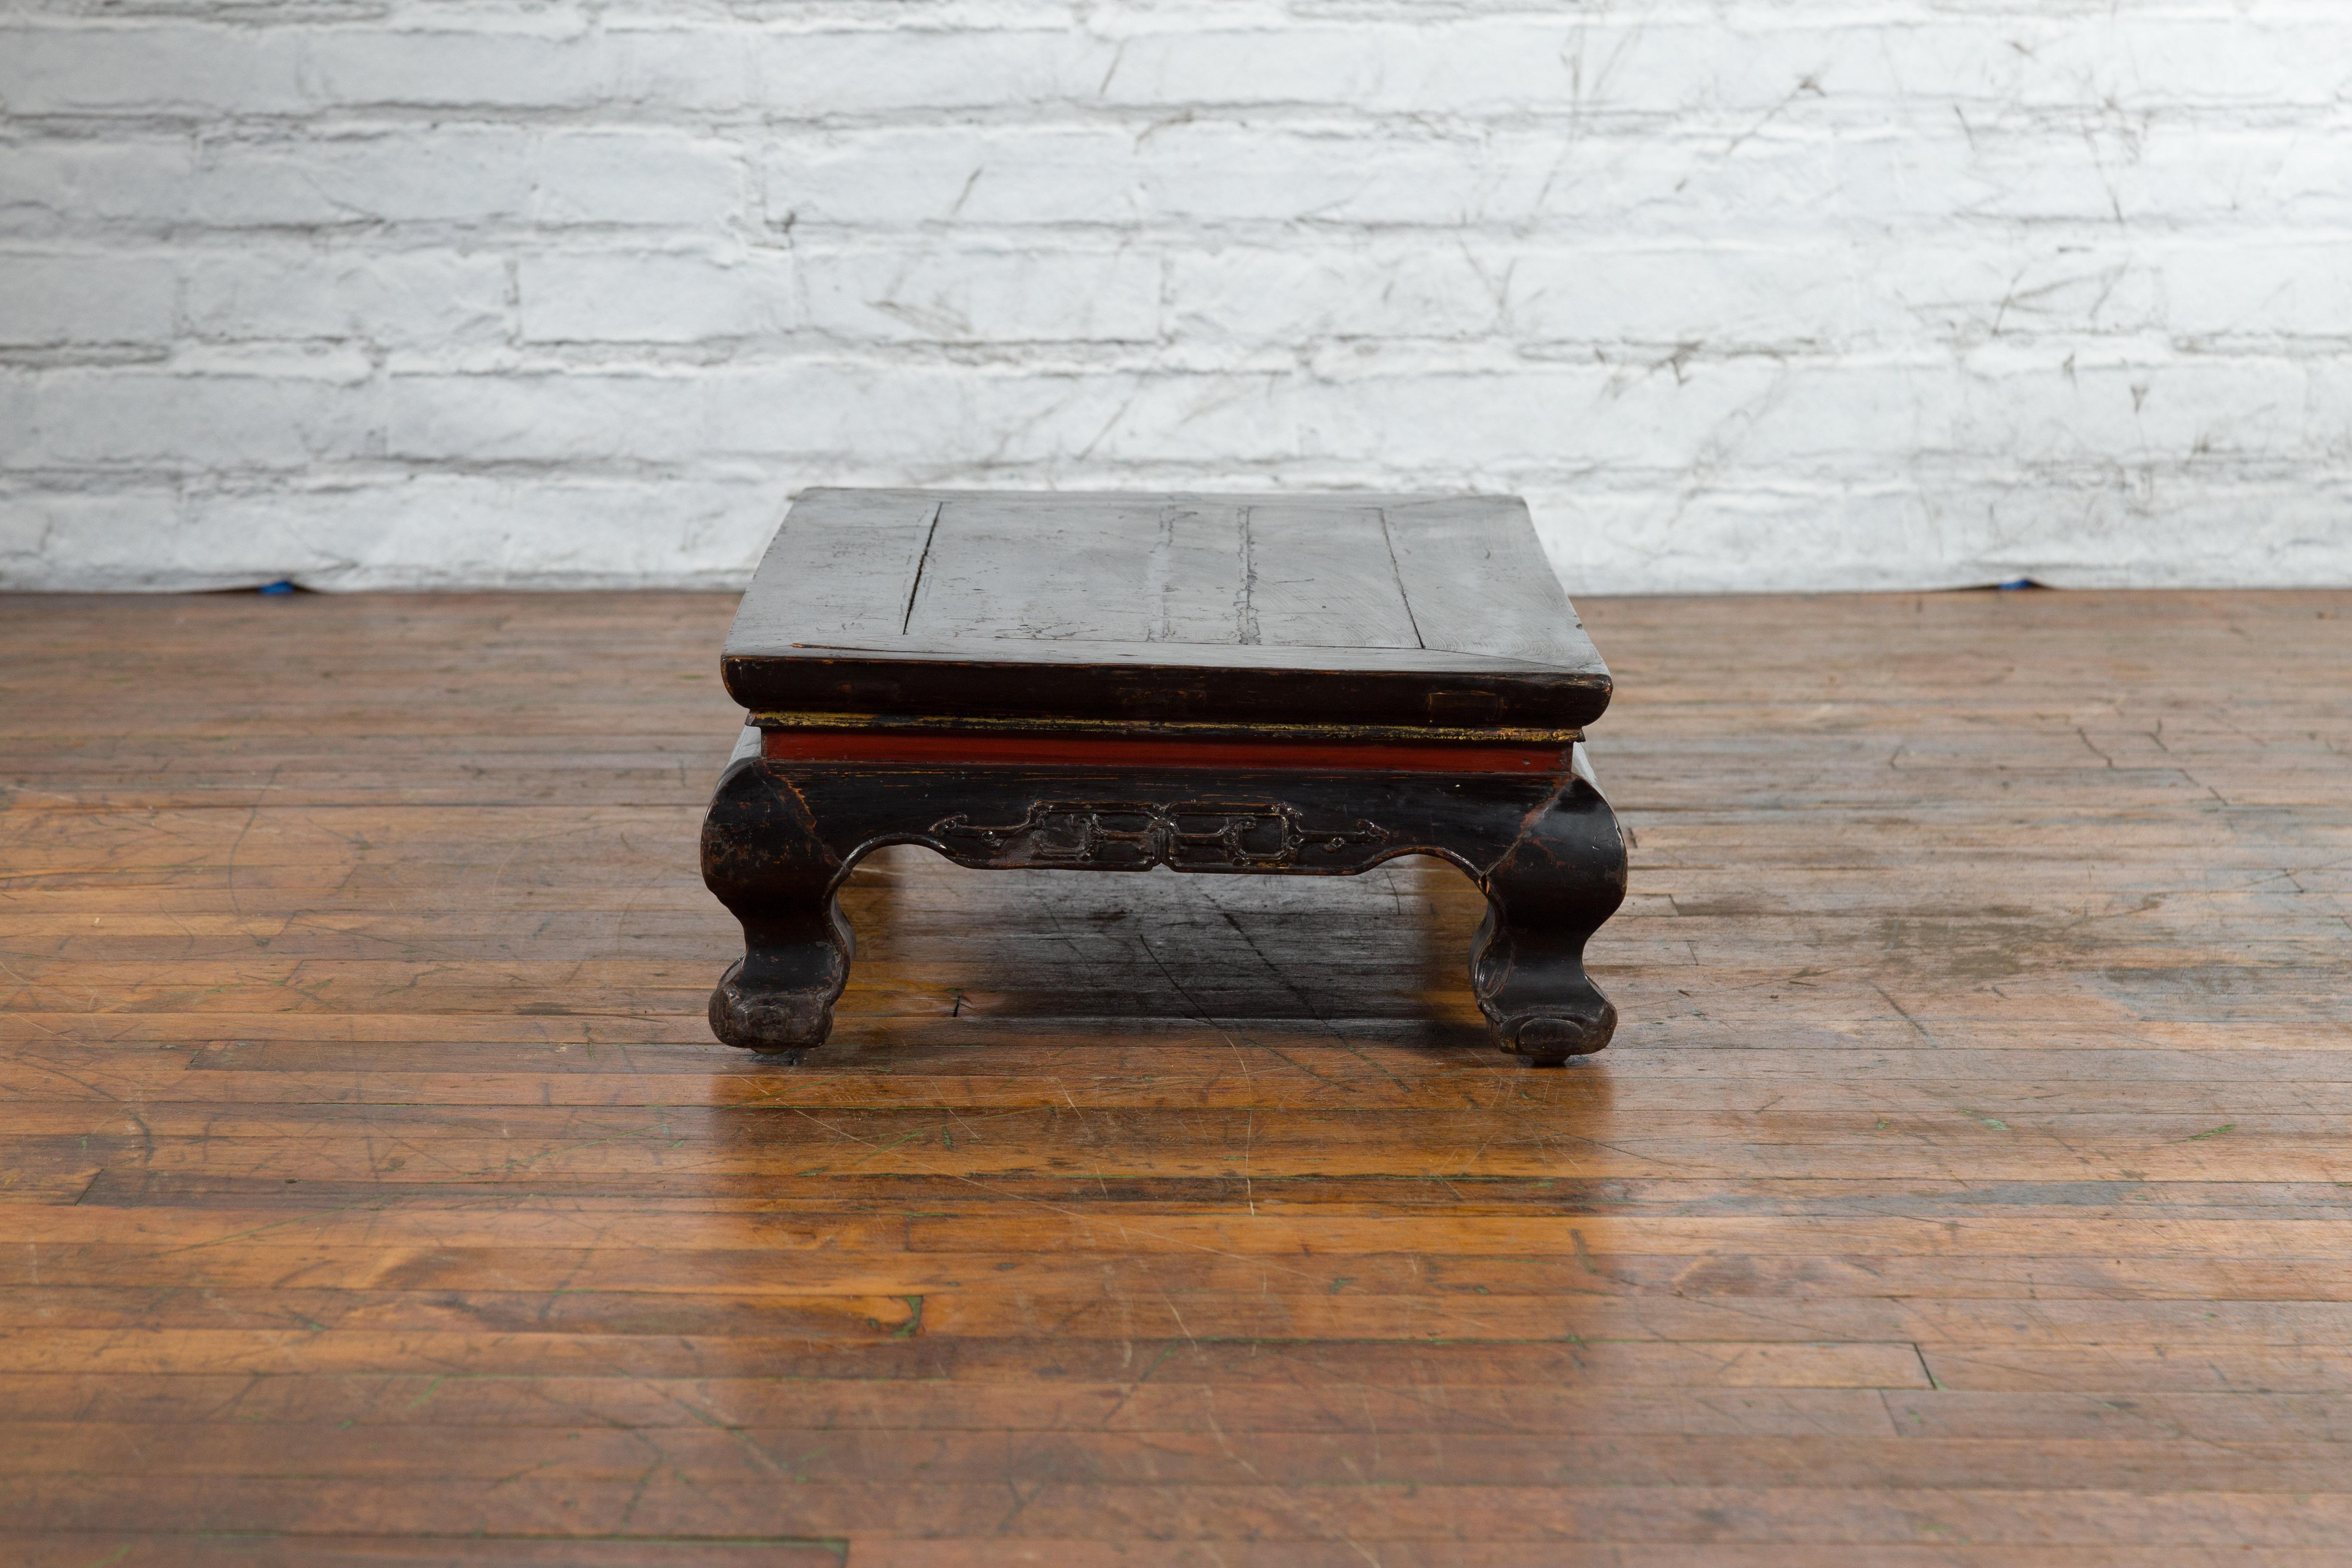 Black and Red Lacquer Qing Dynasty Prayer Table with Low Relief Carved Scrolls For Sale 6